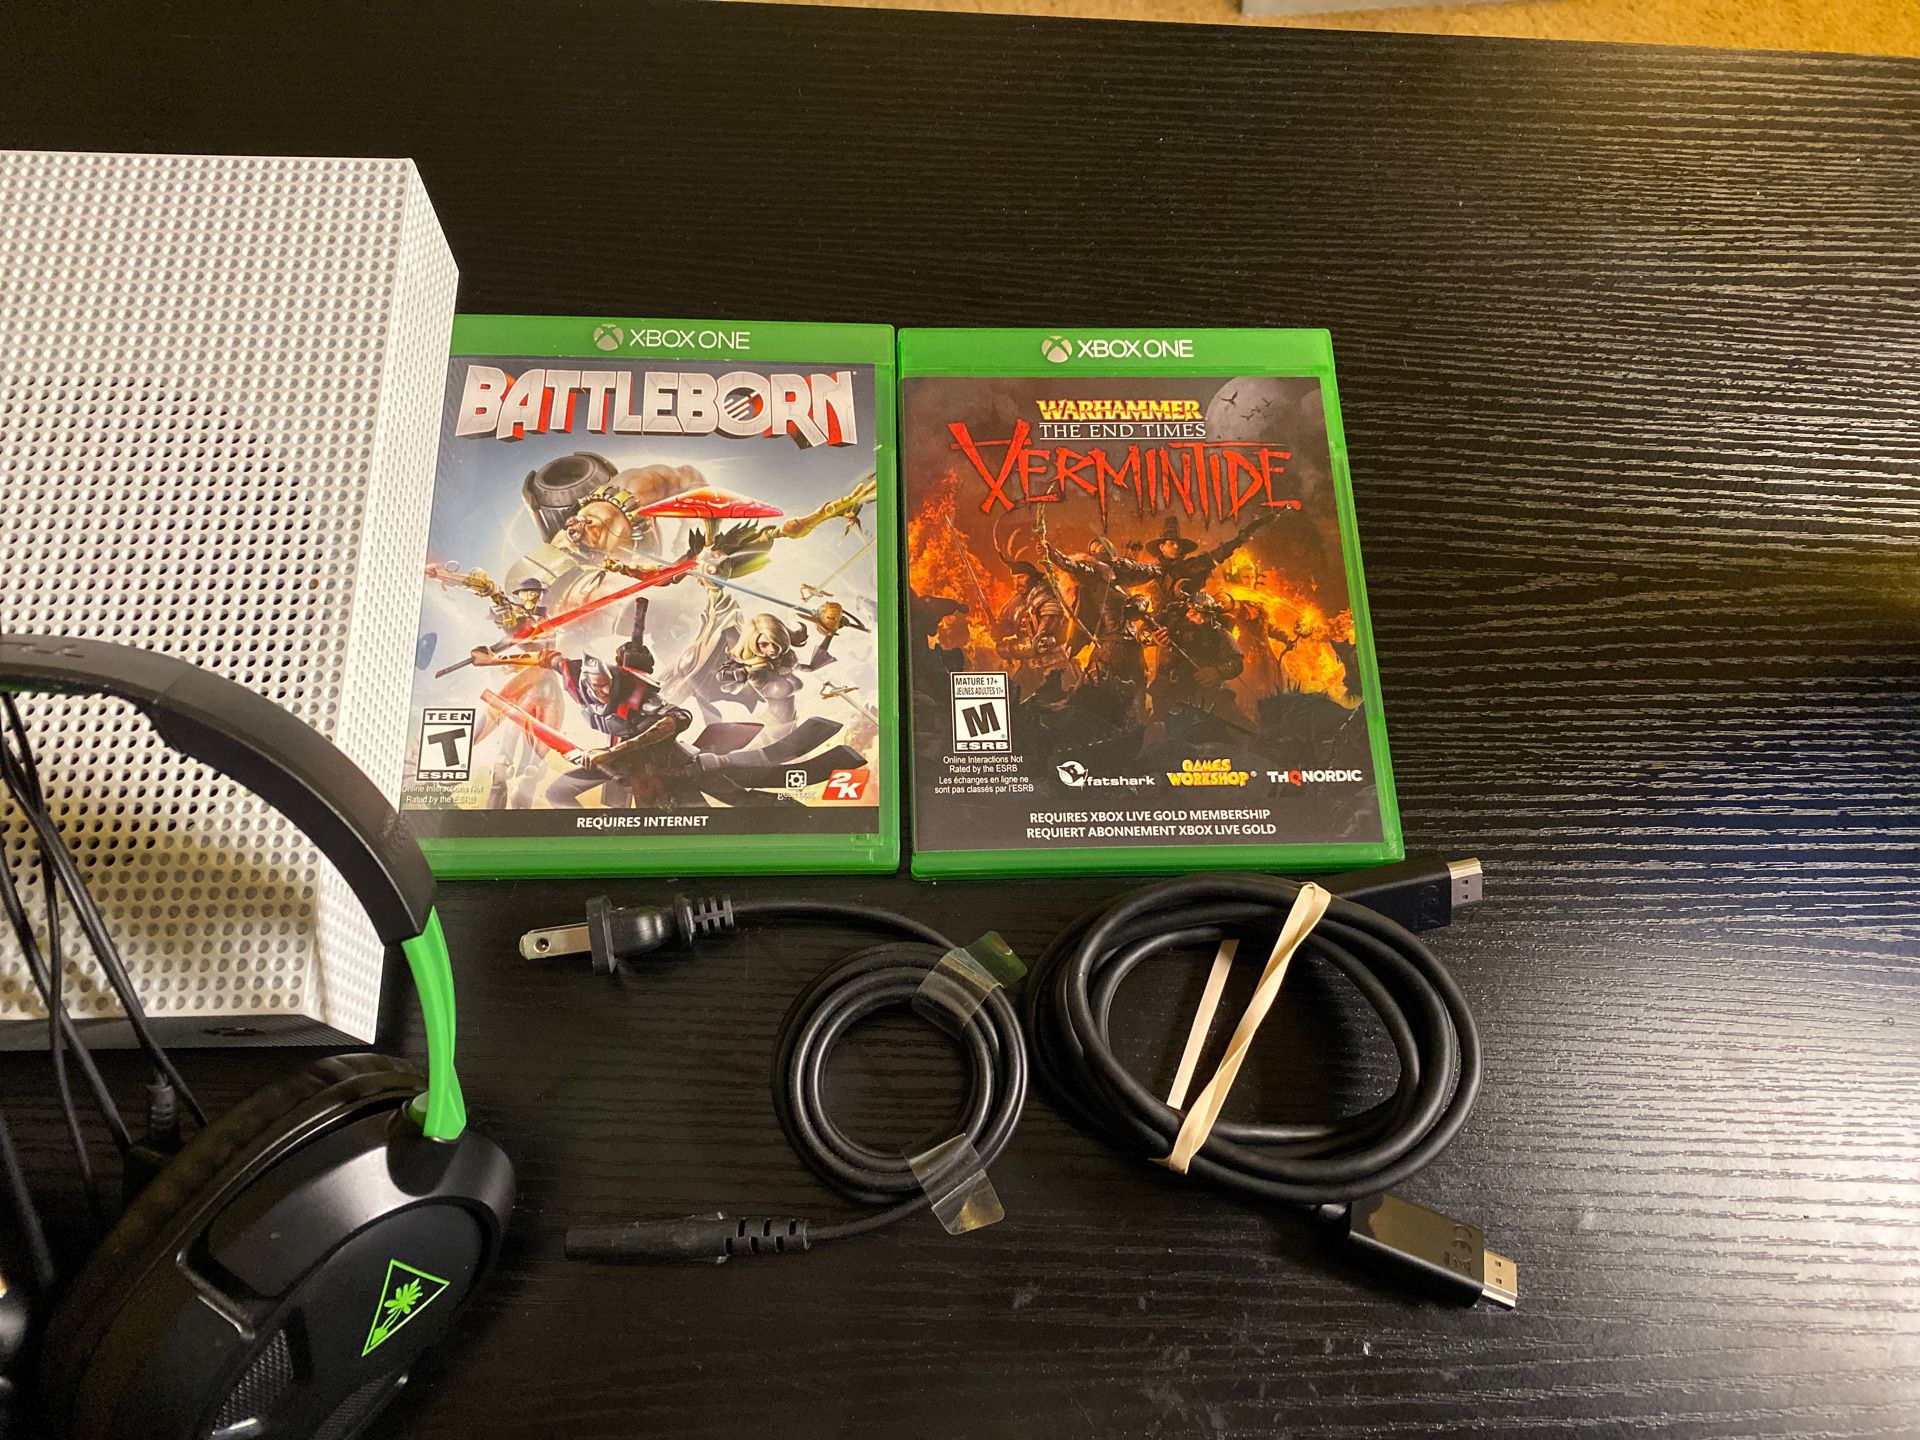 Xbox One S with Turtle beach headset and 2 games